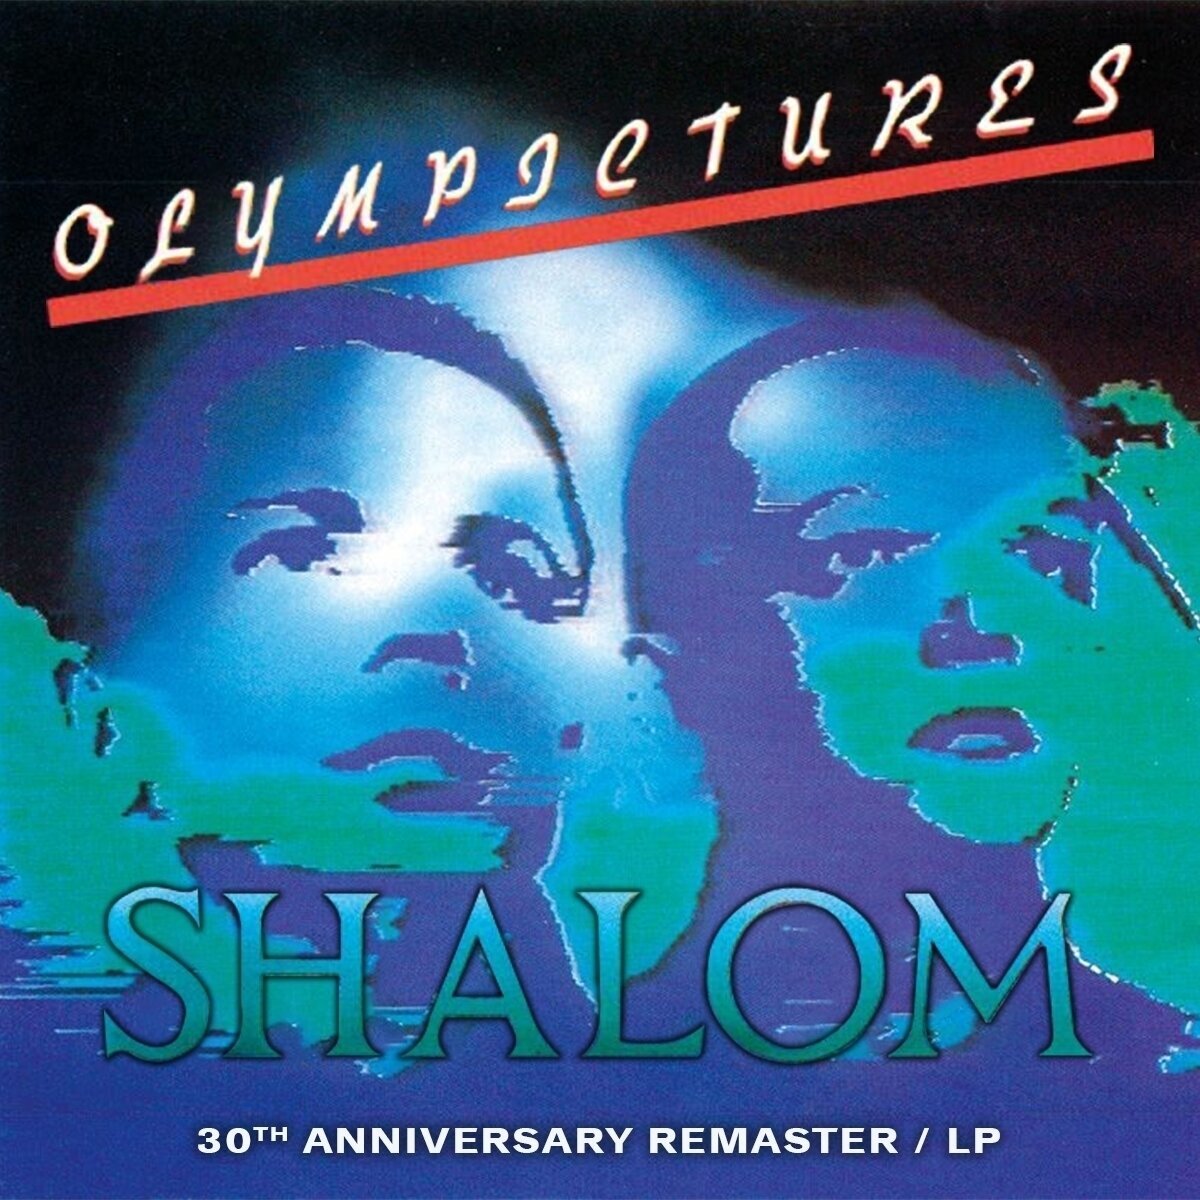 Vinyl Record Shalom - Olympictures (30th Anniversary) (Remastered) (LP)